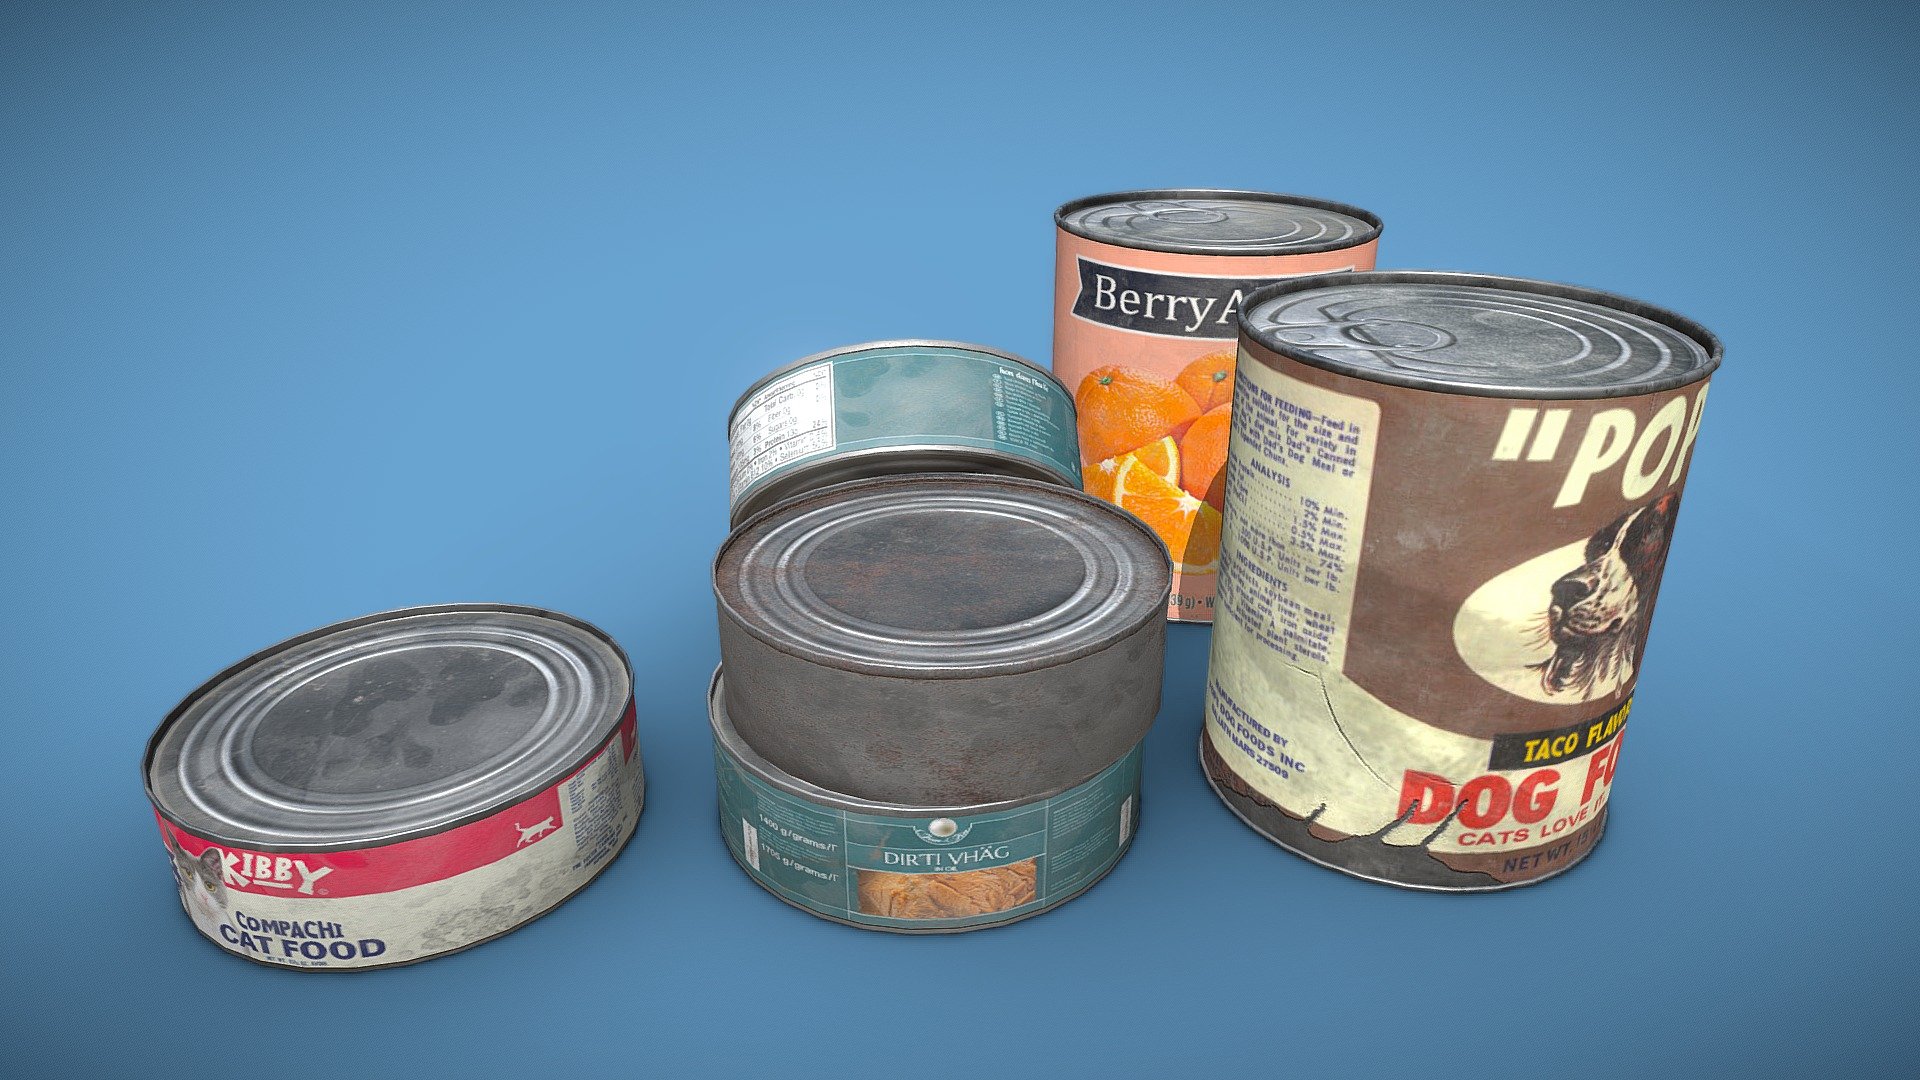 POPS Dog Food is derived from a vintage can of dog food called &ldquo;DADS Dog Food